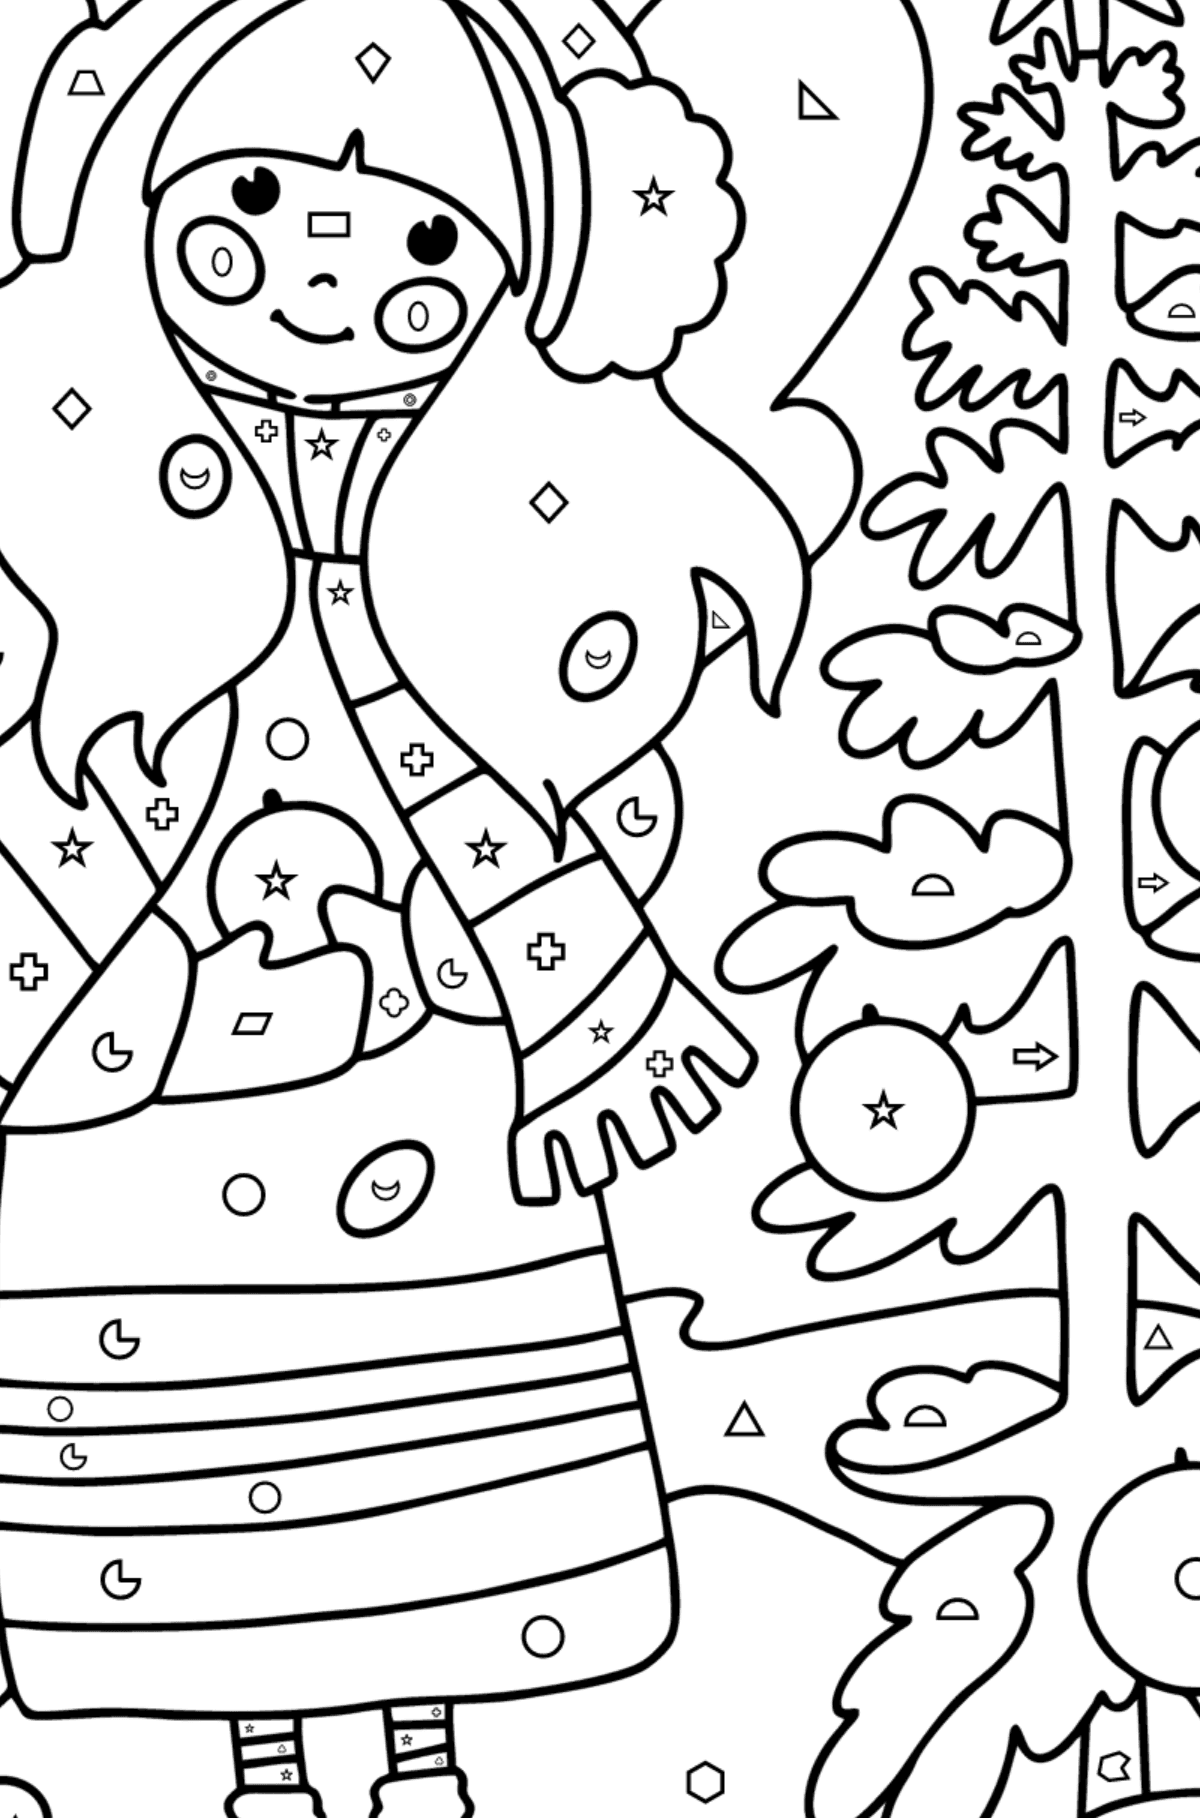 Christmas Fairy coloring page - Coloring by Geometric Shapes for Kids